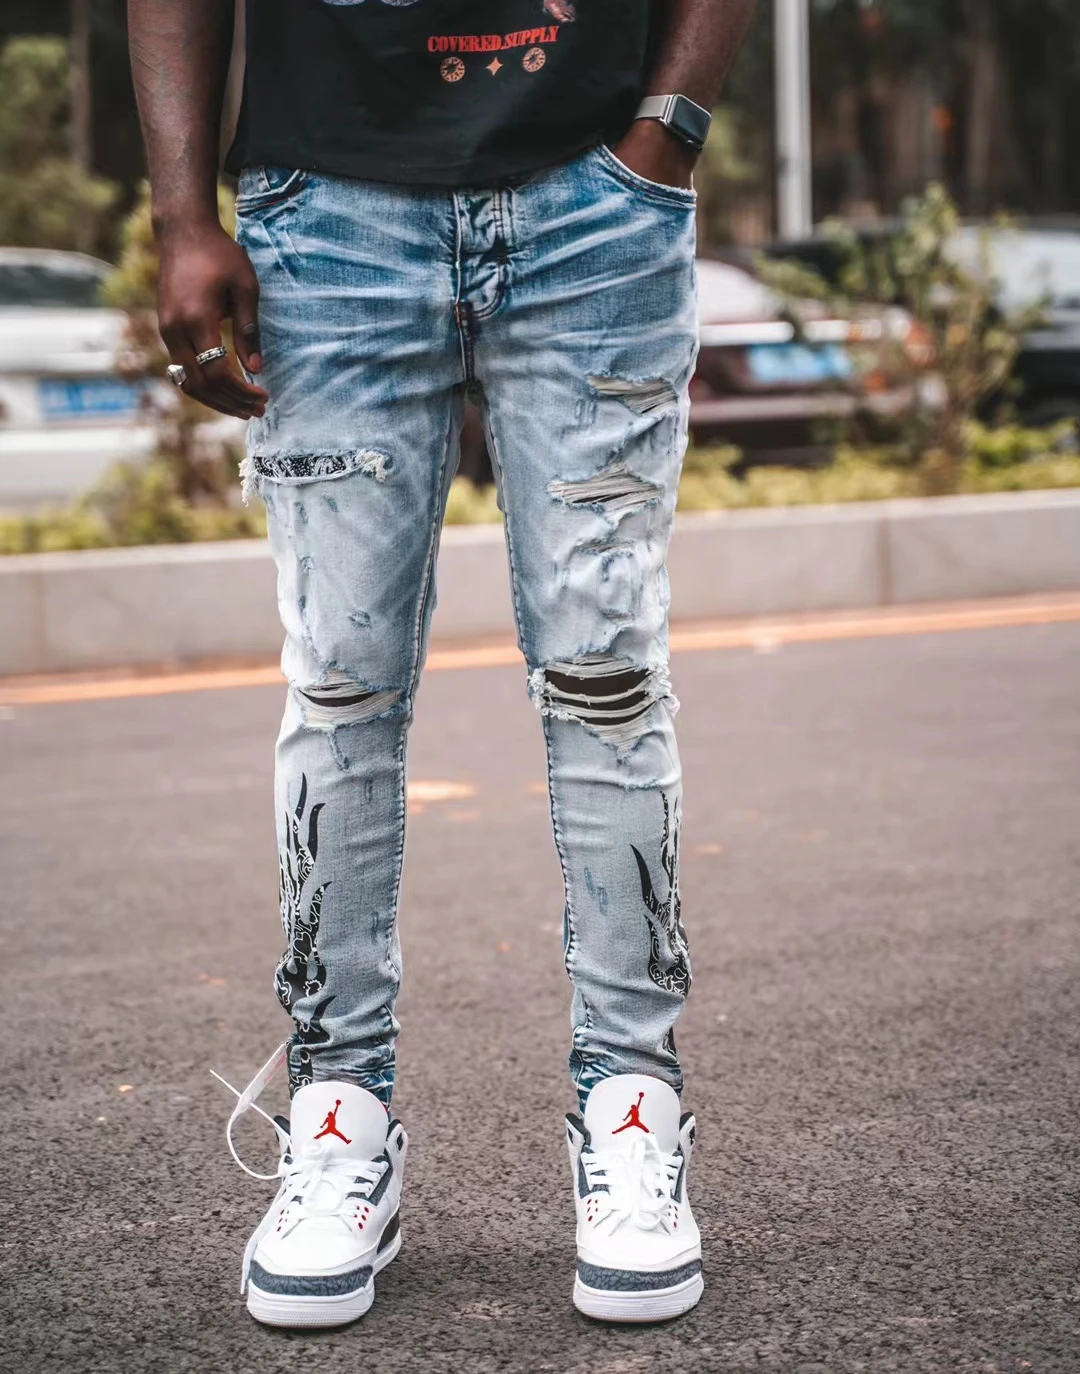 

New Fashion AM Men's Ripped Jeans Blue Flame Personality Print Slim Pants Holes Patched Men's Jeans High Street Jeans For Men